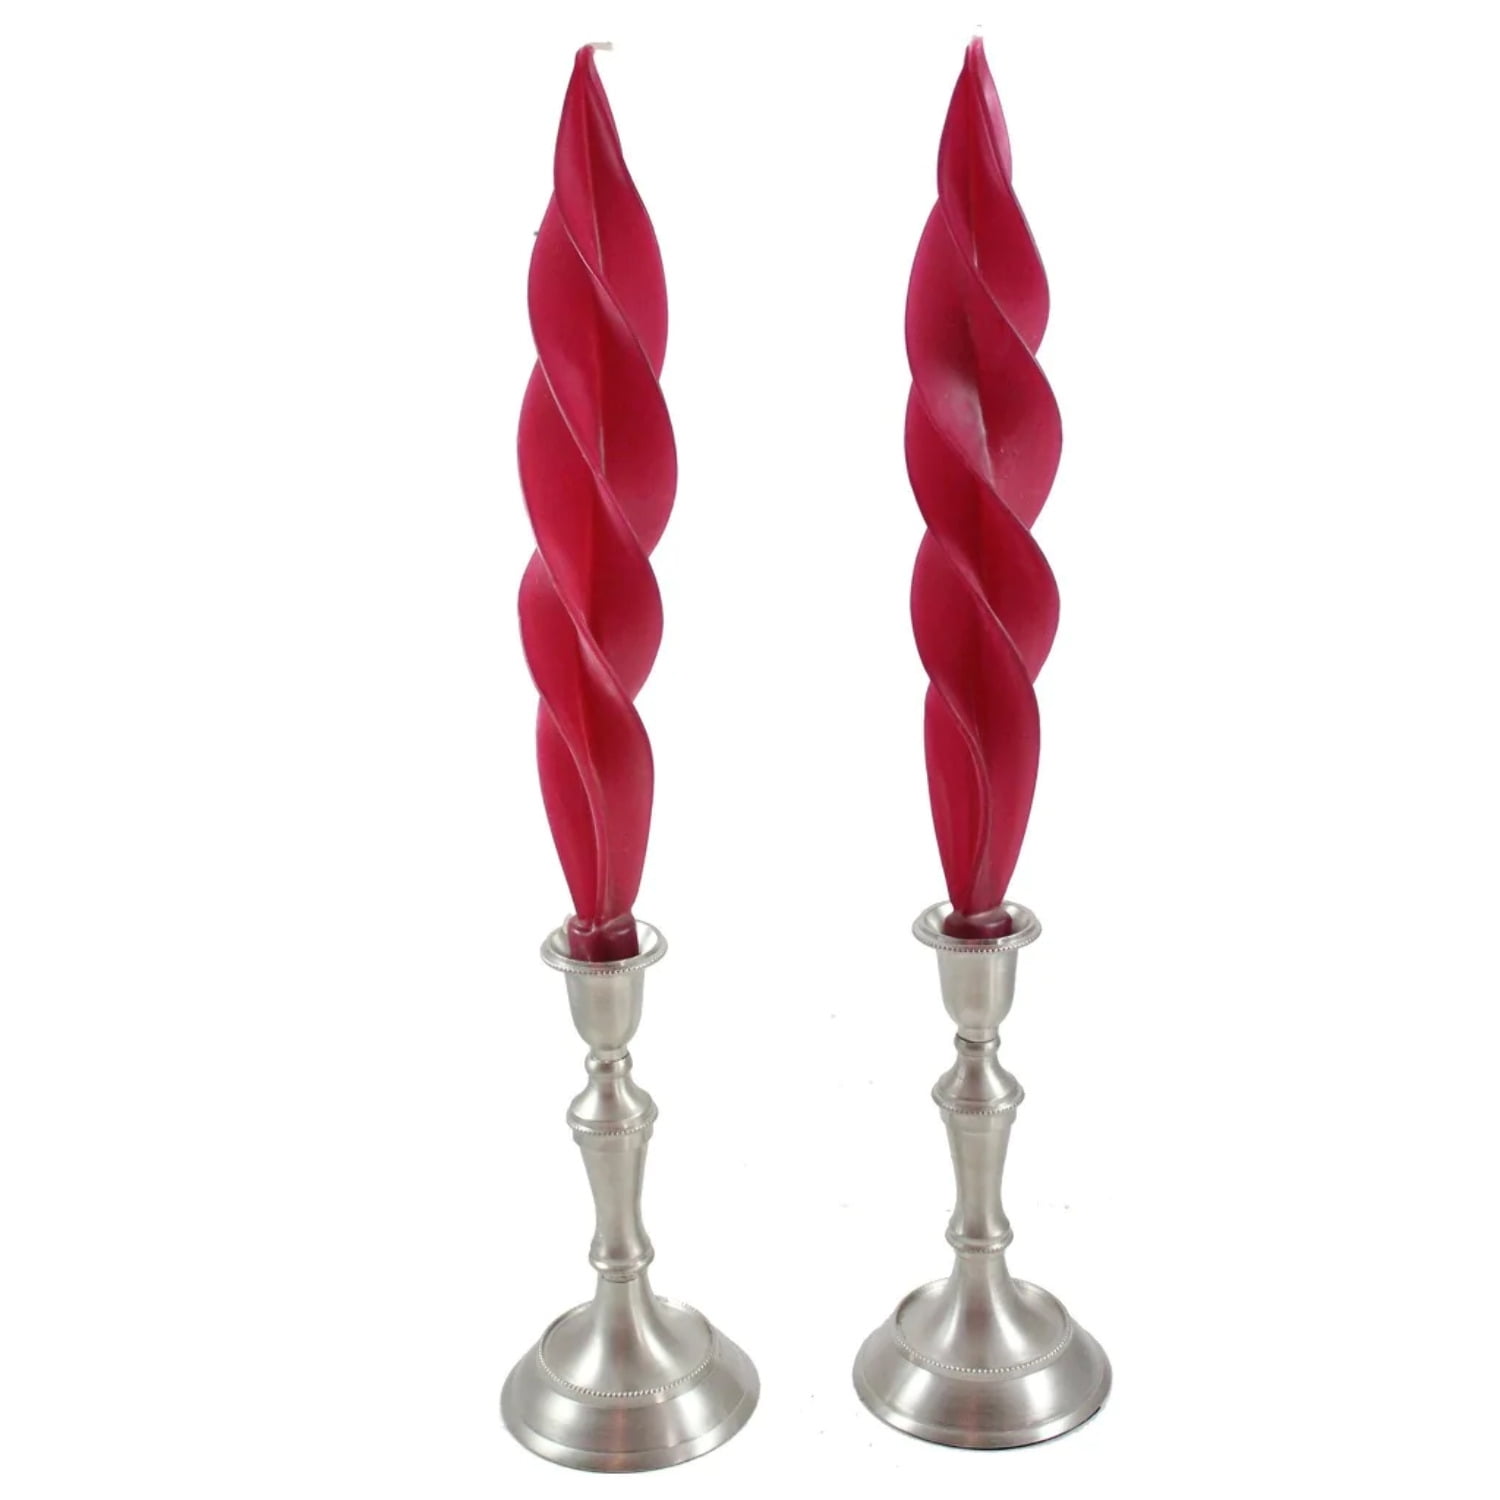 10 Cream Spiral Taper Candles, 2ct. by Ashland®